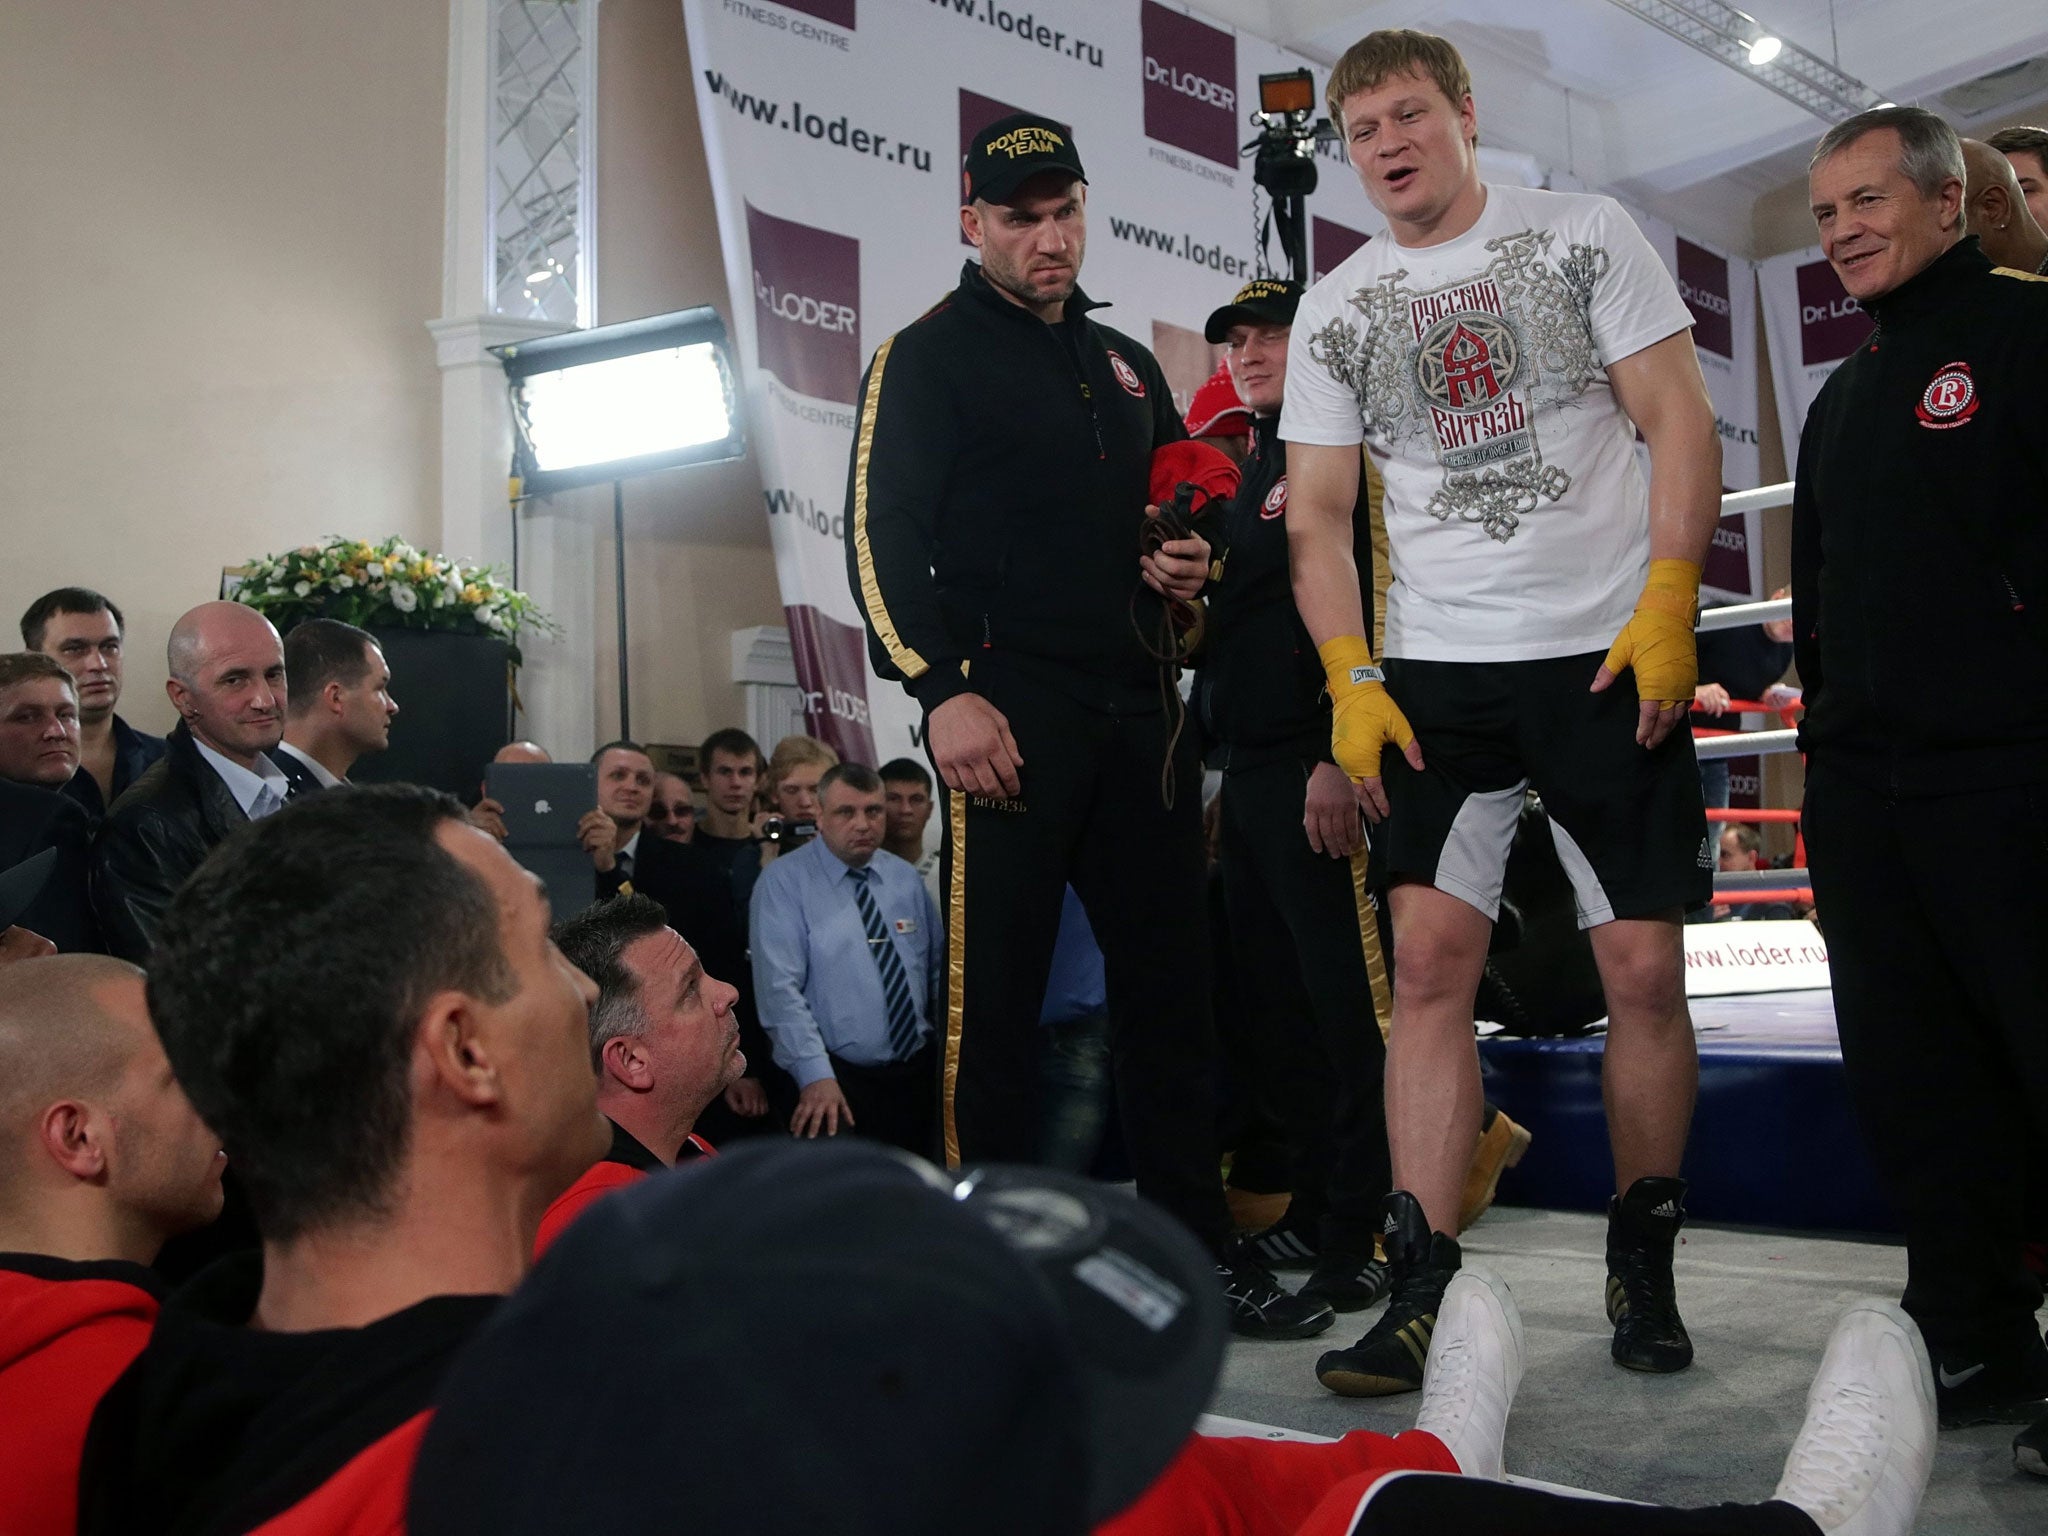 Alexander Povetkin (second right) has words with Vladimir Klitschko (bottom left) in the build-up to their world title fight